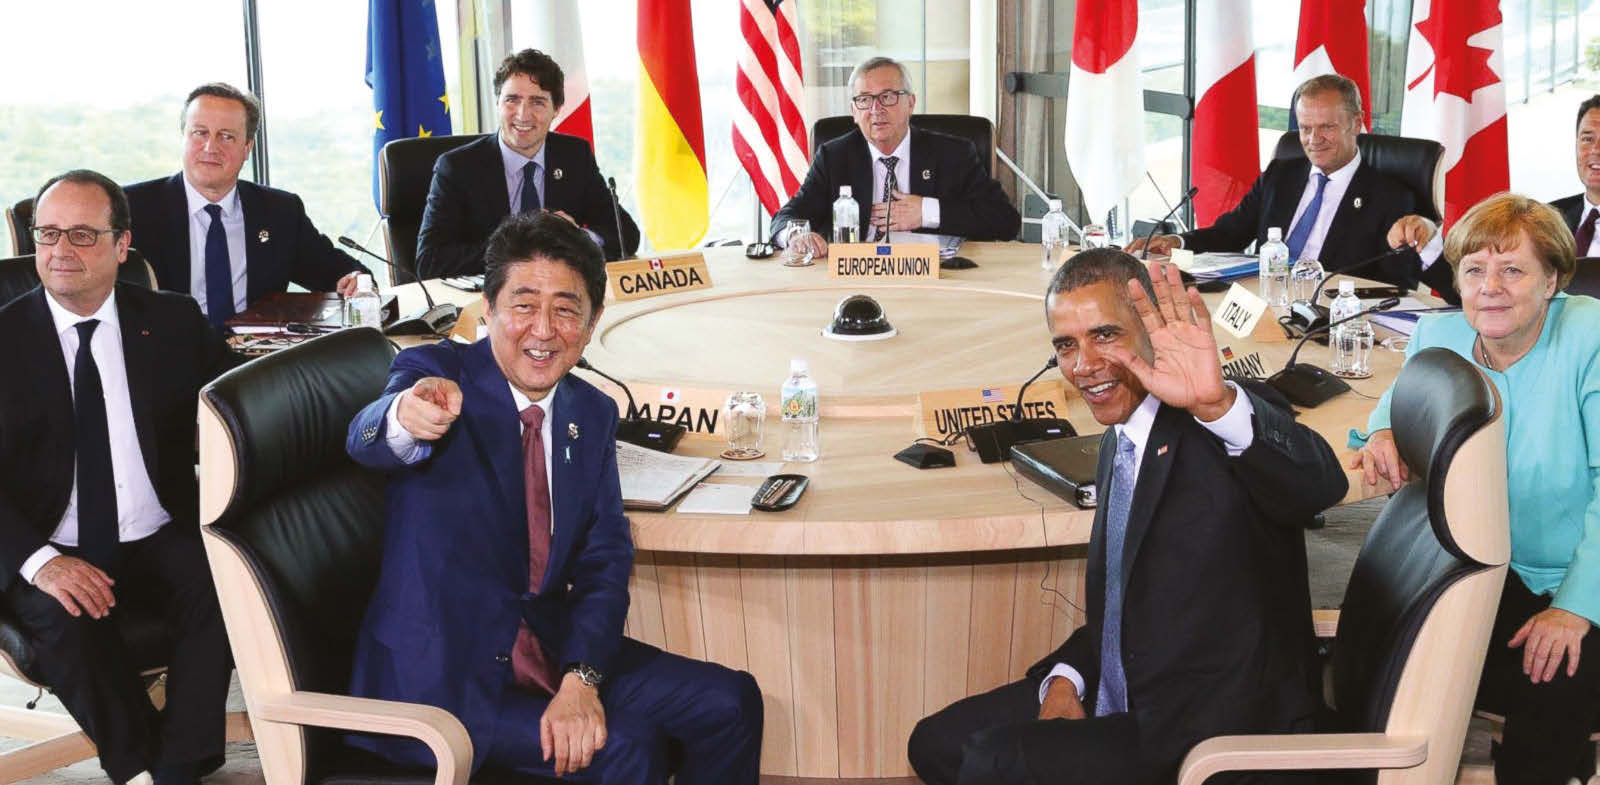 Japanese Prime Minsiter Shinzo Abe, foreground center left, and U.S. President Barack Obama, foreground center right, smile at photographers with other leaders of Group of Seven industrial nations, clockwise from left, French President Francois Hollande, British Prime Minister David Cameron, Canadian Prime Minister Justin Trudeau, European Commission President Jean-Claude Juncker, European Council President Donald Tusk, Italian Prime Minister Matteo Renzi and German Chancellor Angela Merkel, at the start of the second working session of the G-7 summit meetings in Shima, Mie Prefecture, Japan, Thursday, on May 26, 2016. (AP)